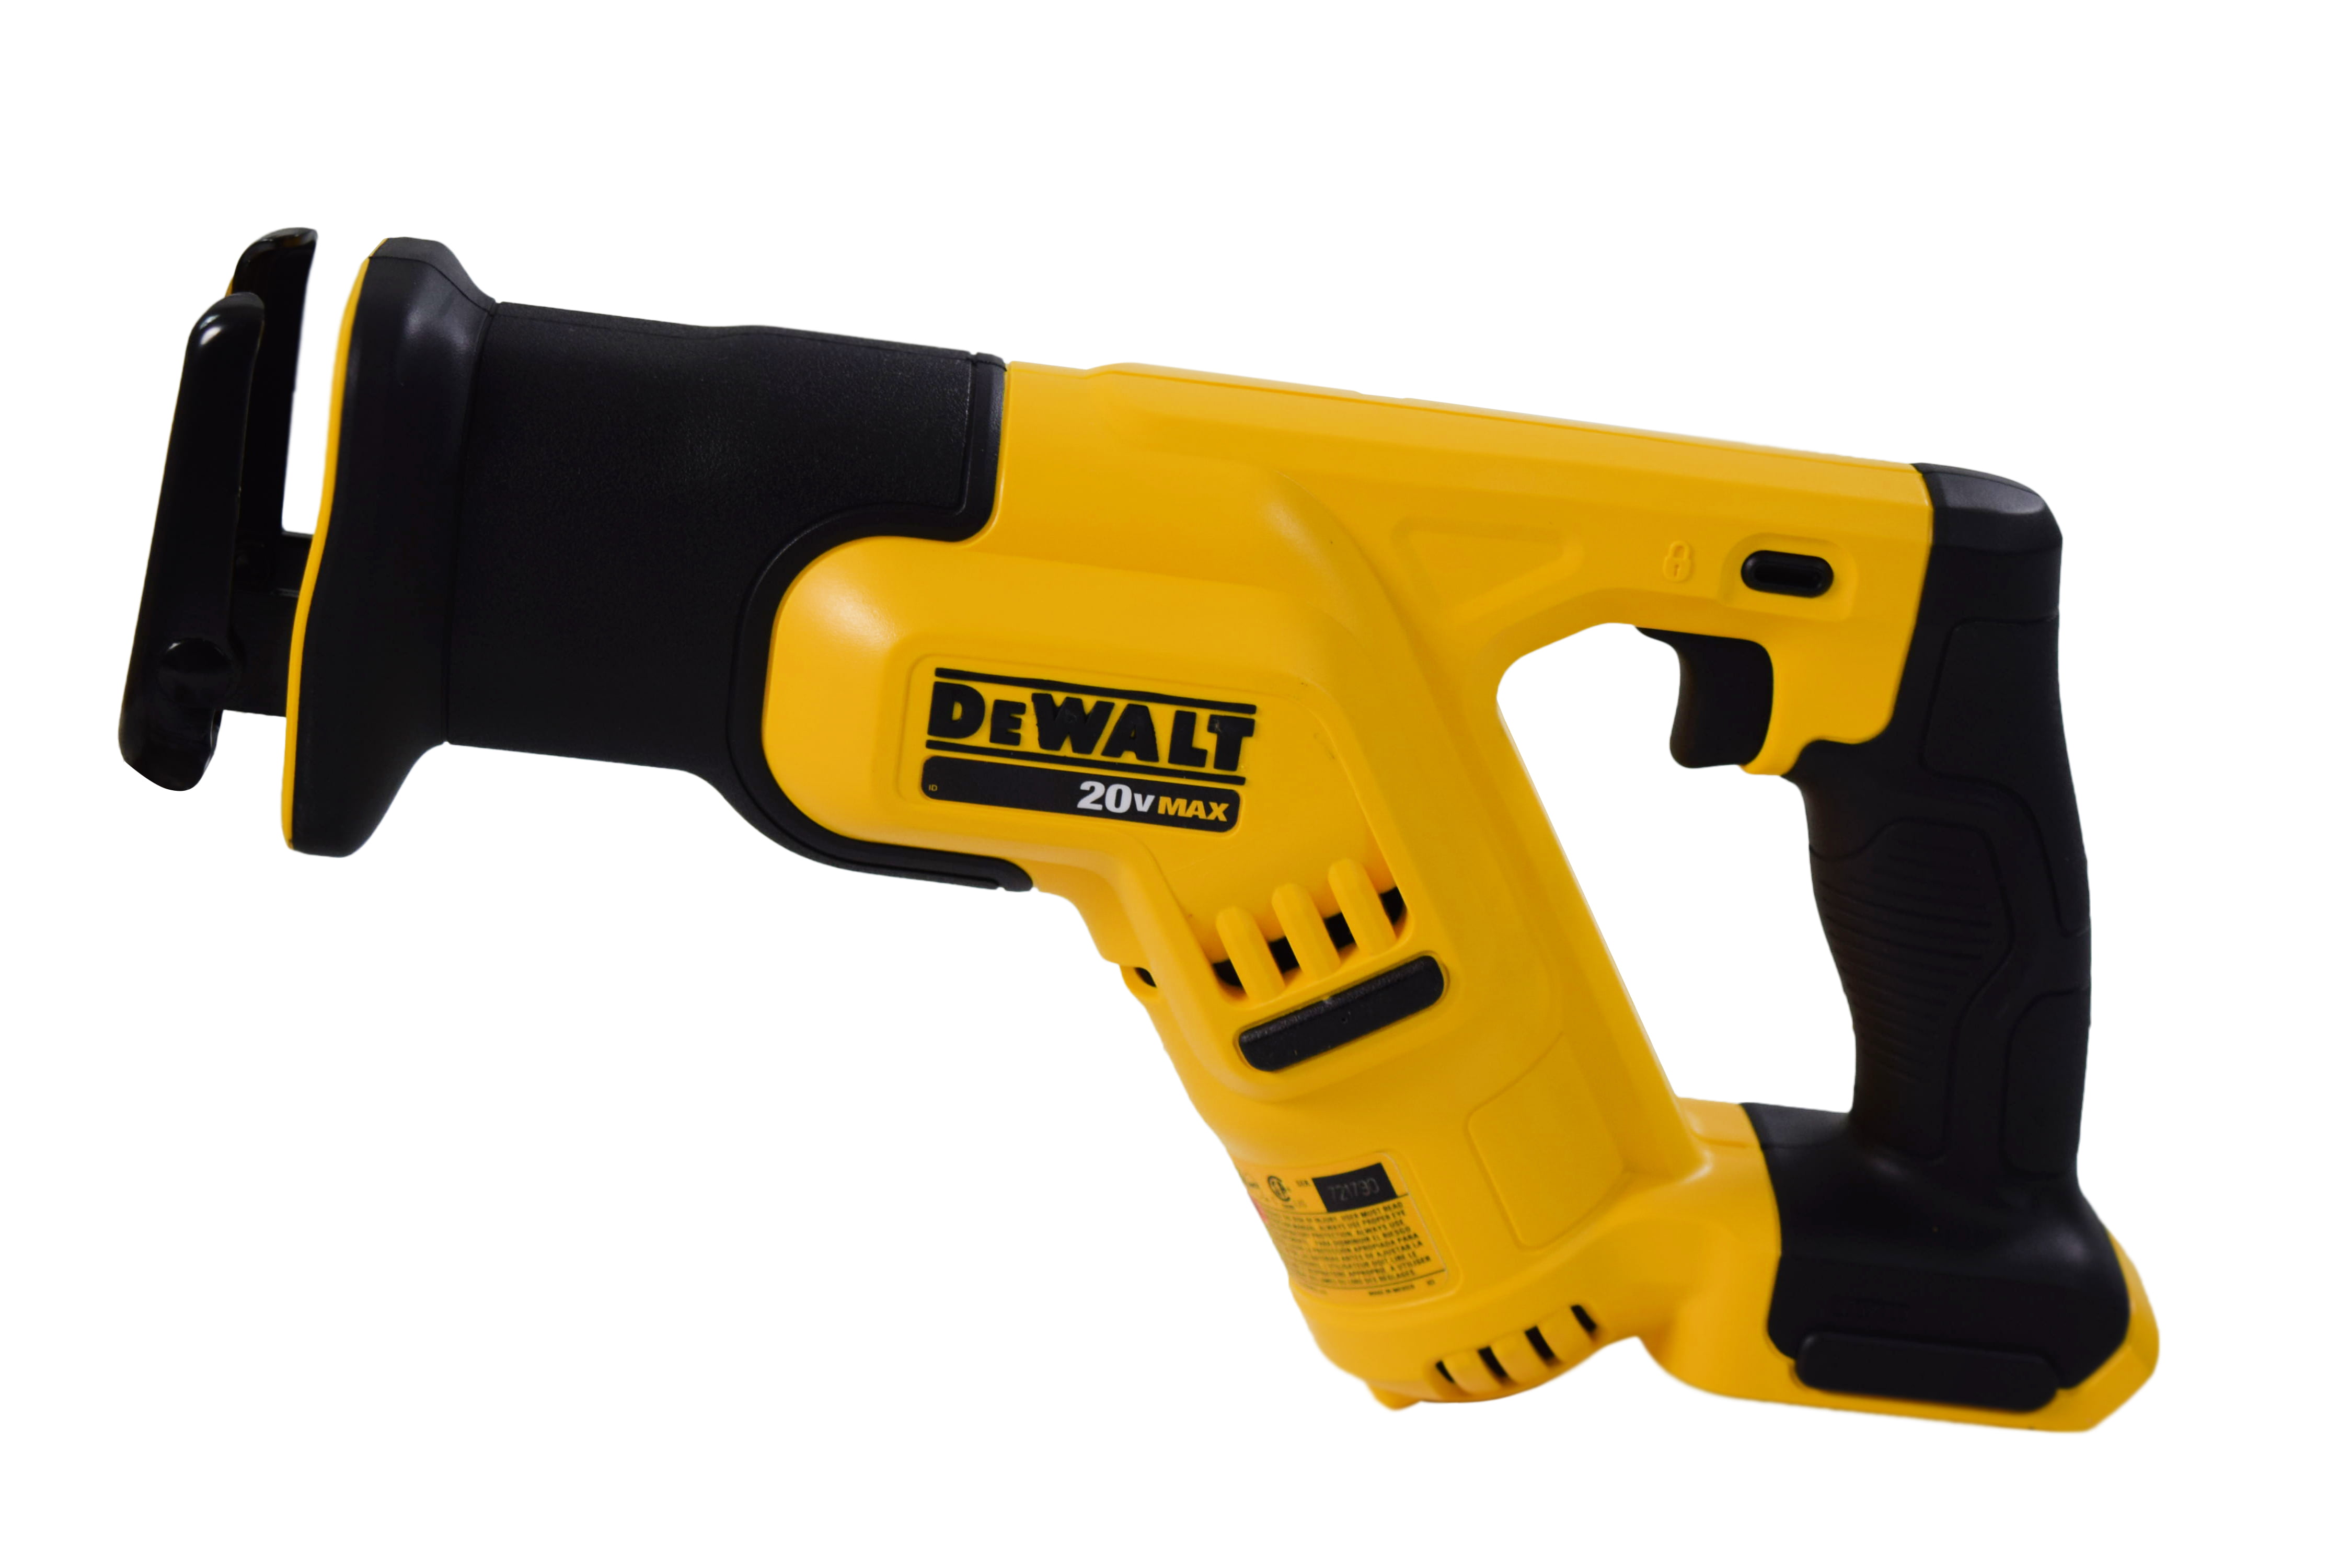 DEWALT DCS387B 20V Compact Cordless Reciprocating Saw Tool Only for sale online 